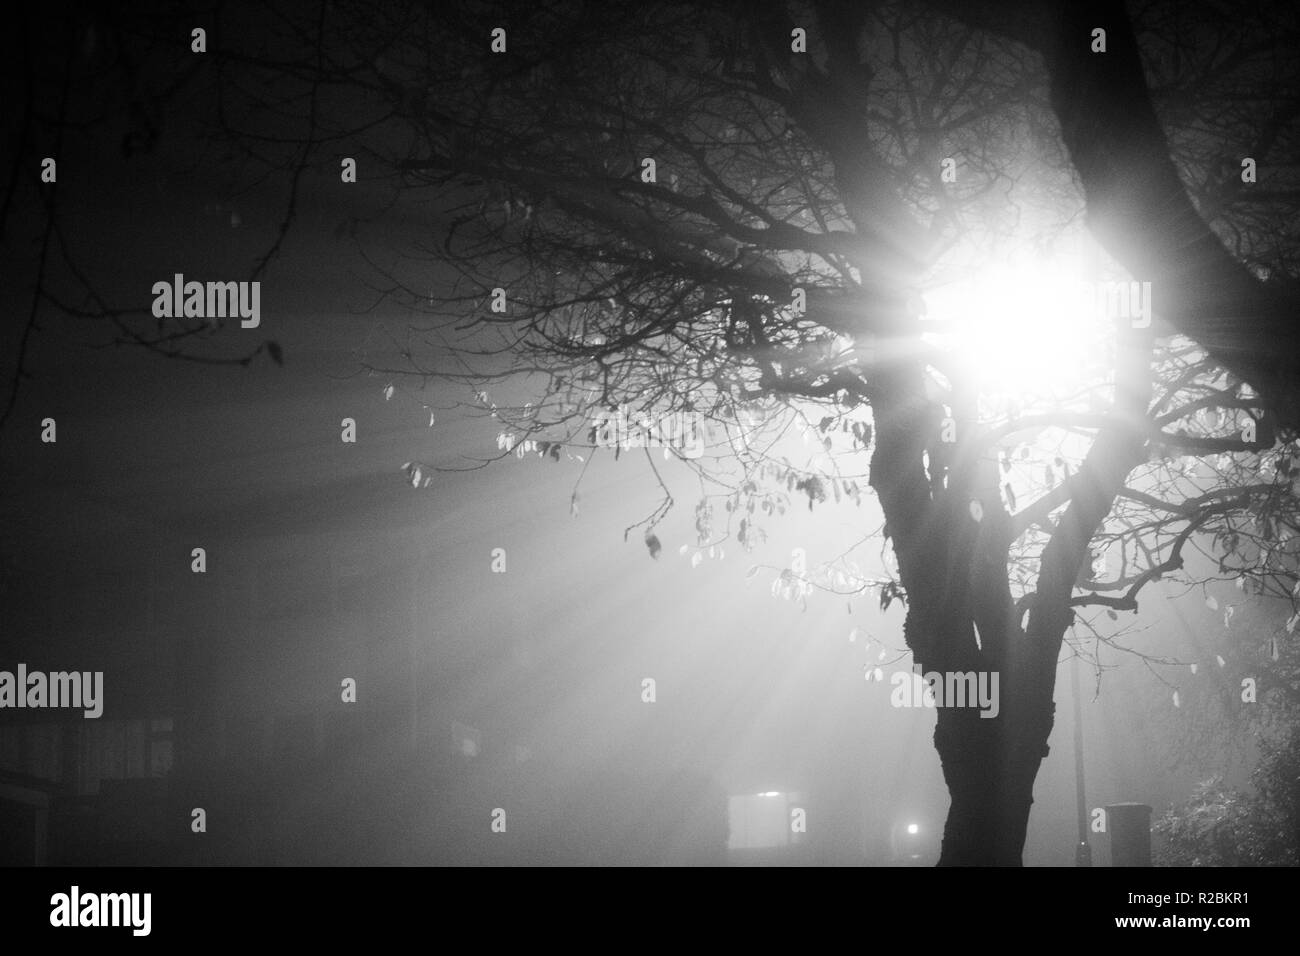 Bare trees on a foggy winter night in black and white Stock Photo